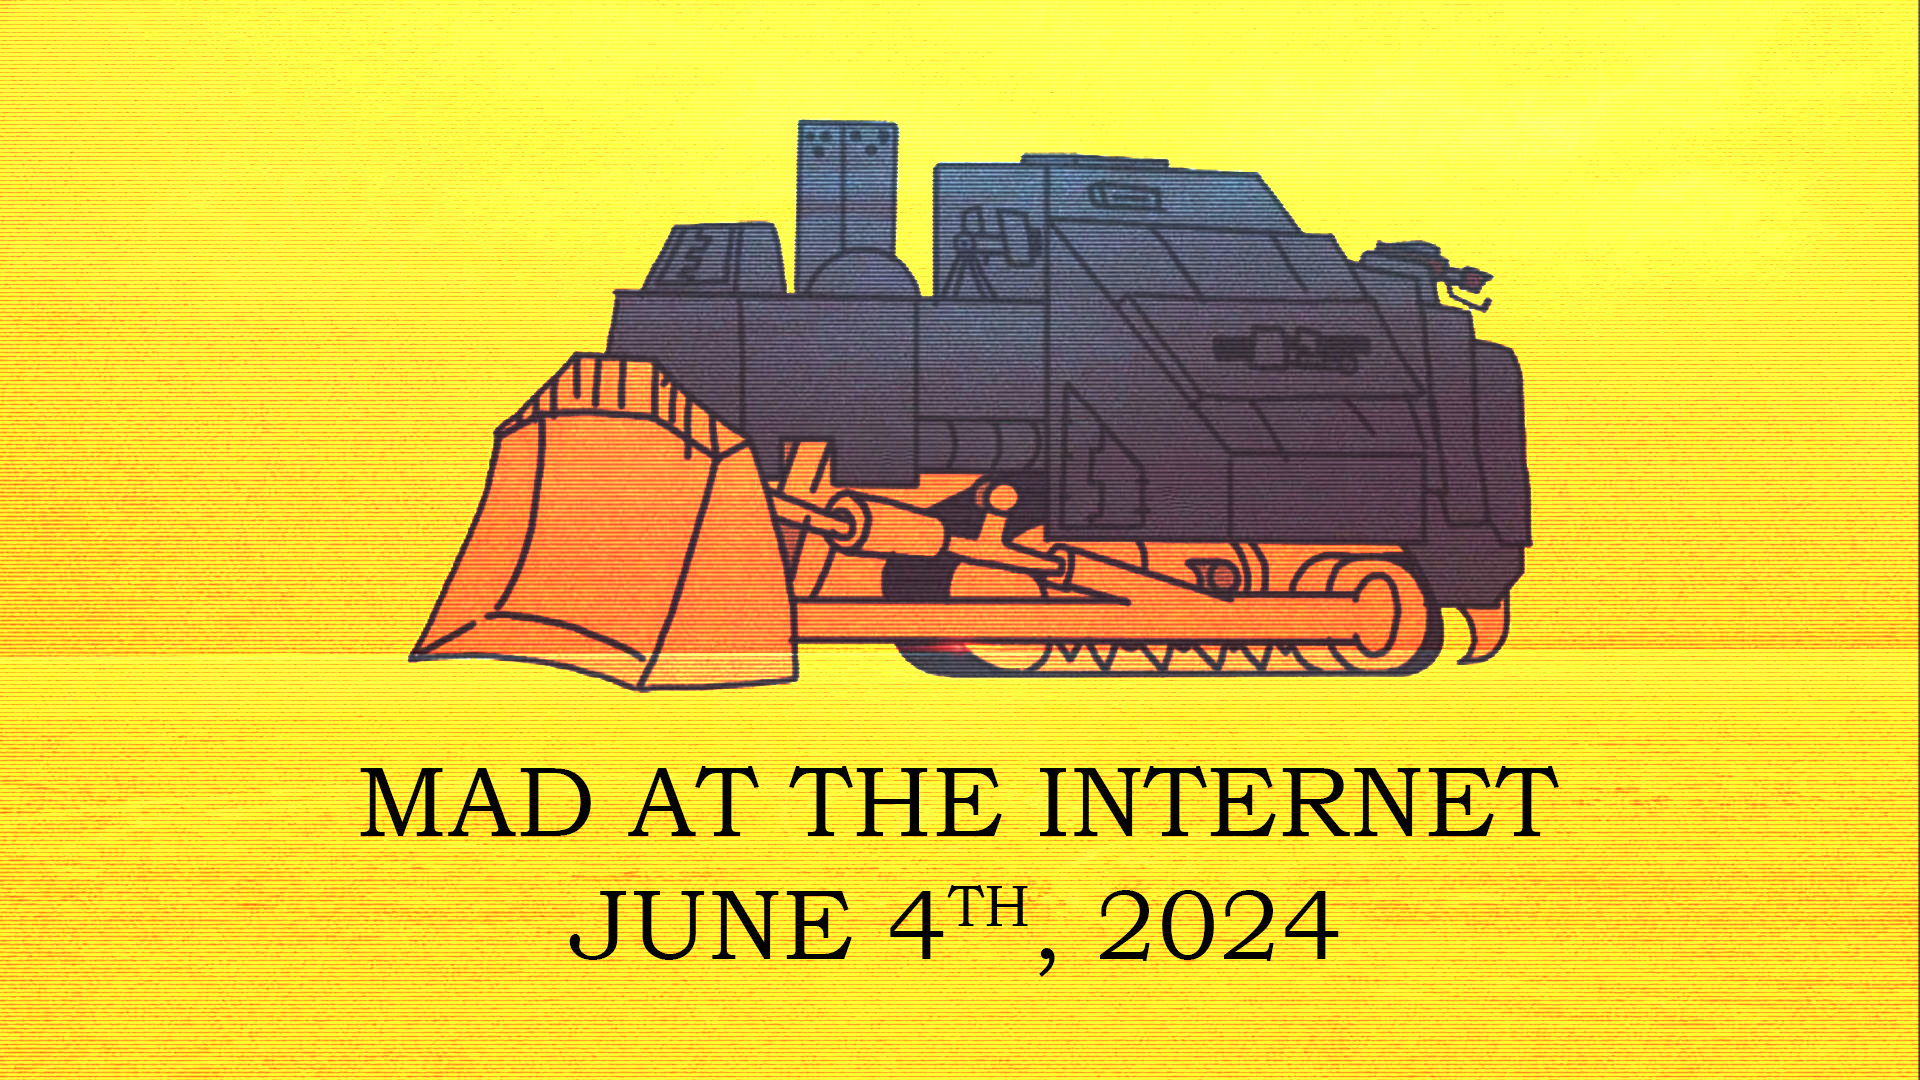 Rainbow Road (June 4th, 2024) - Mad at the Internet